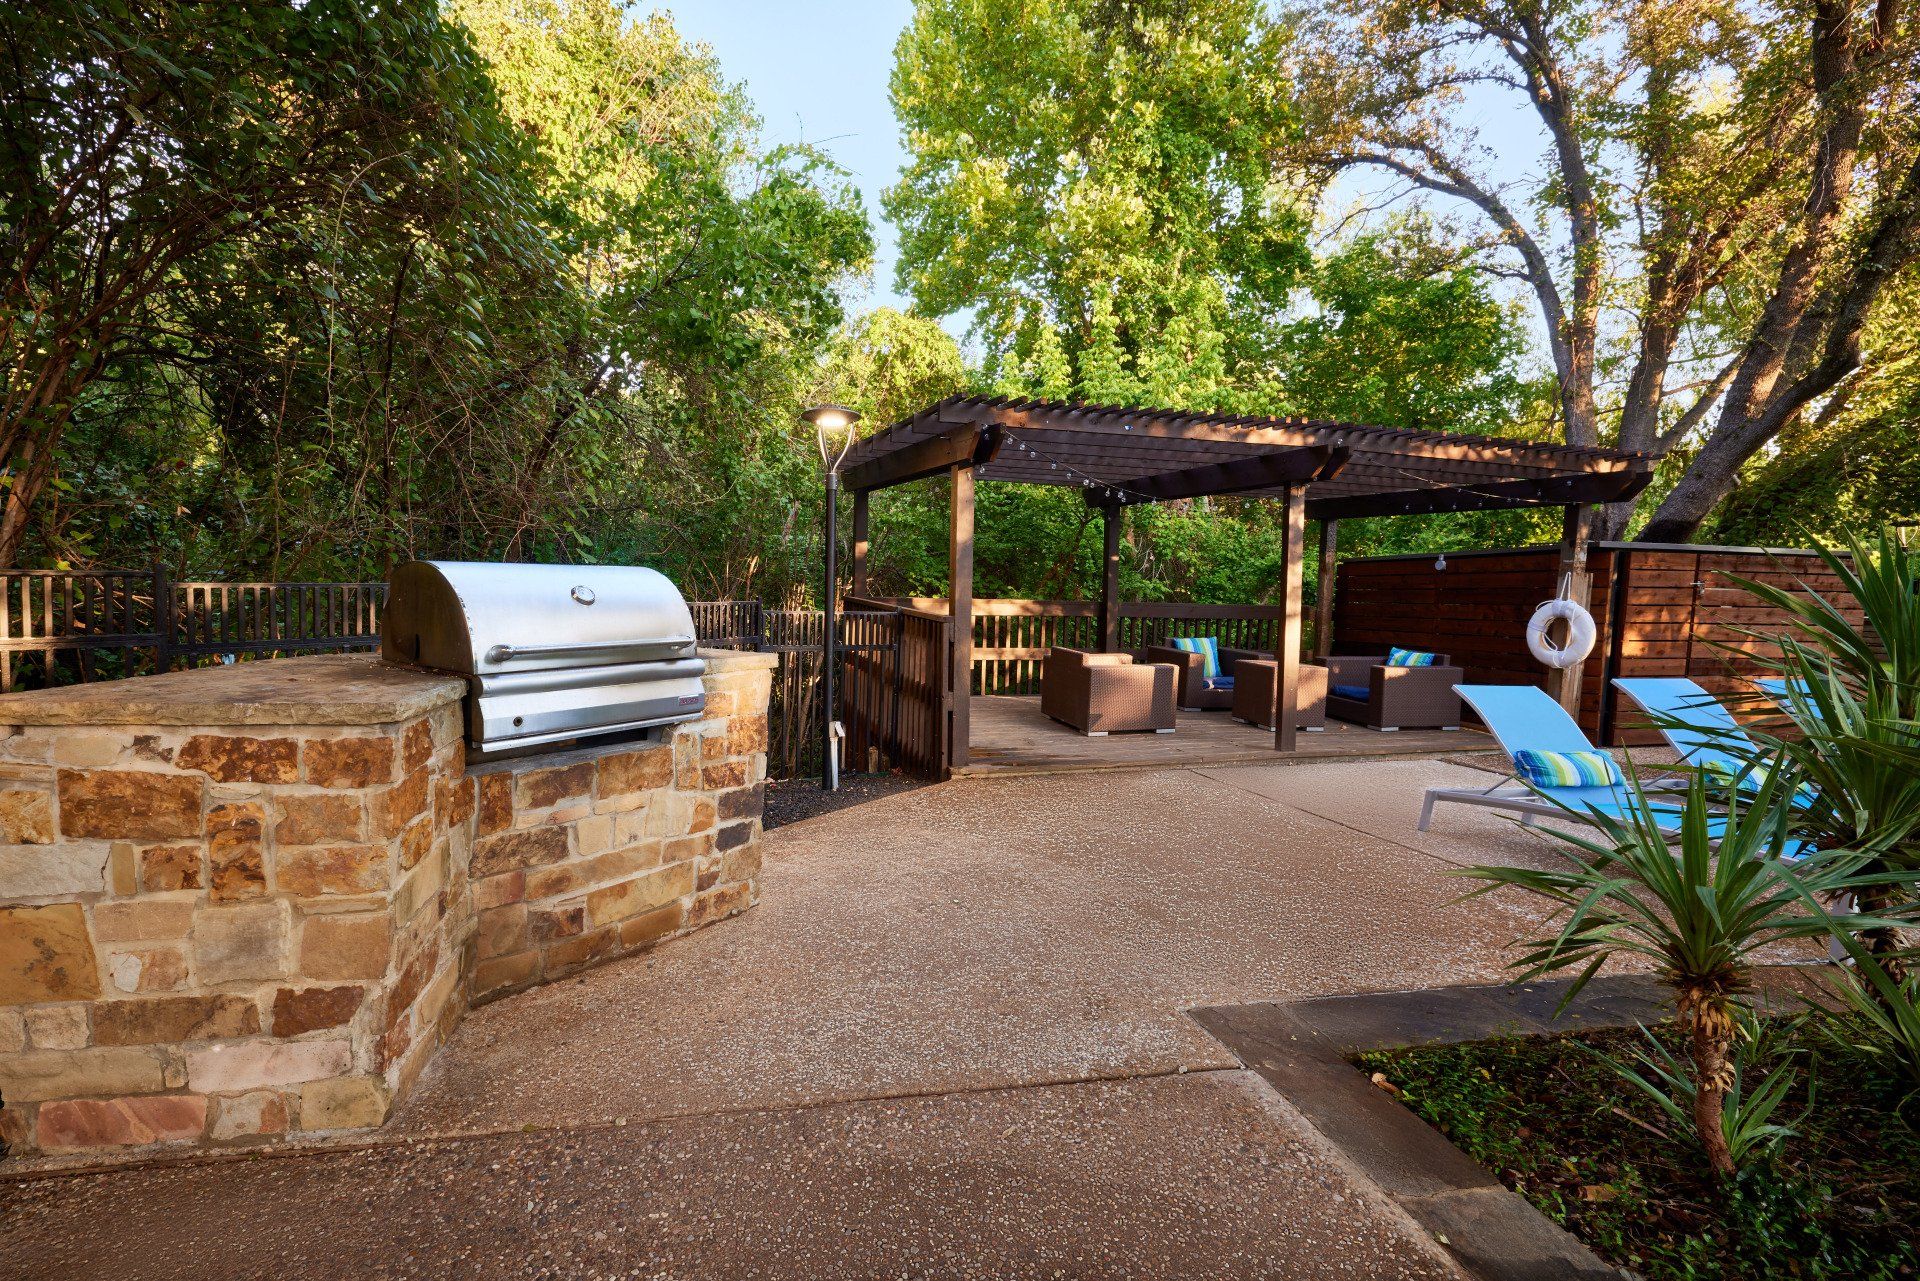 A grill and a gazebo poolside at Summerwood Cove Apartments.